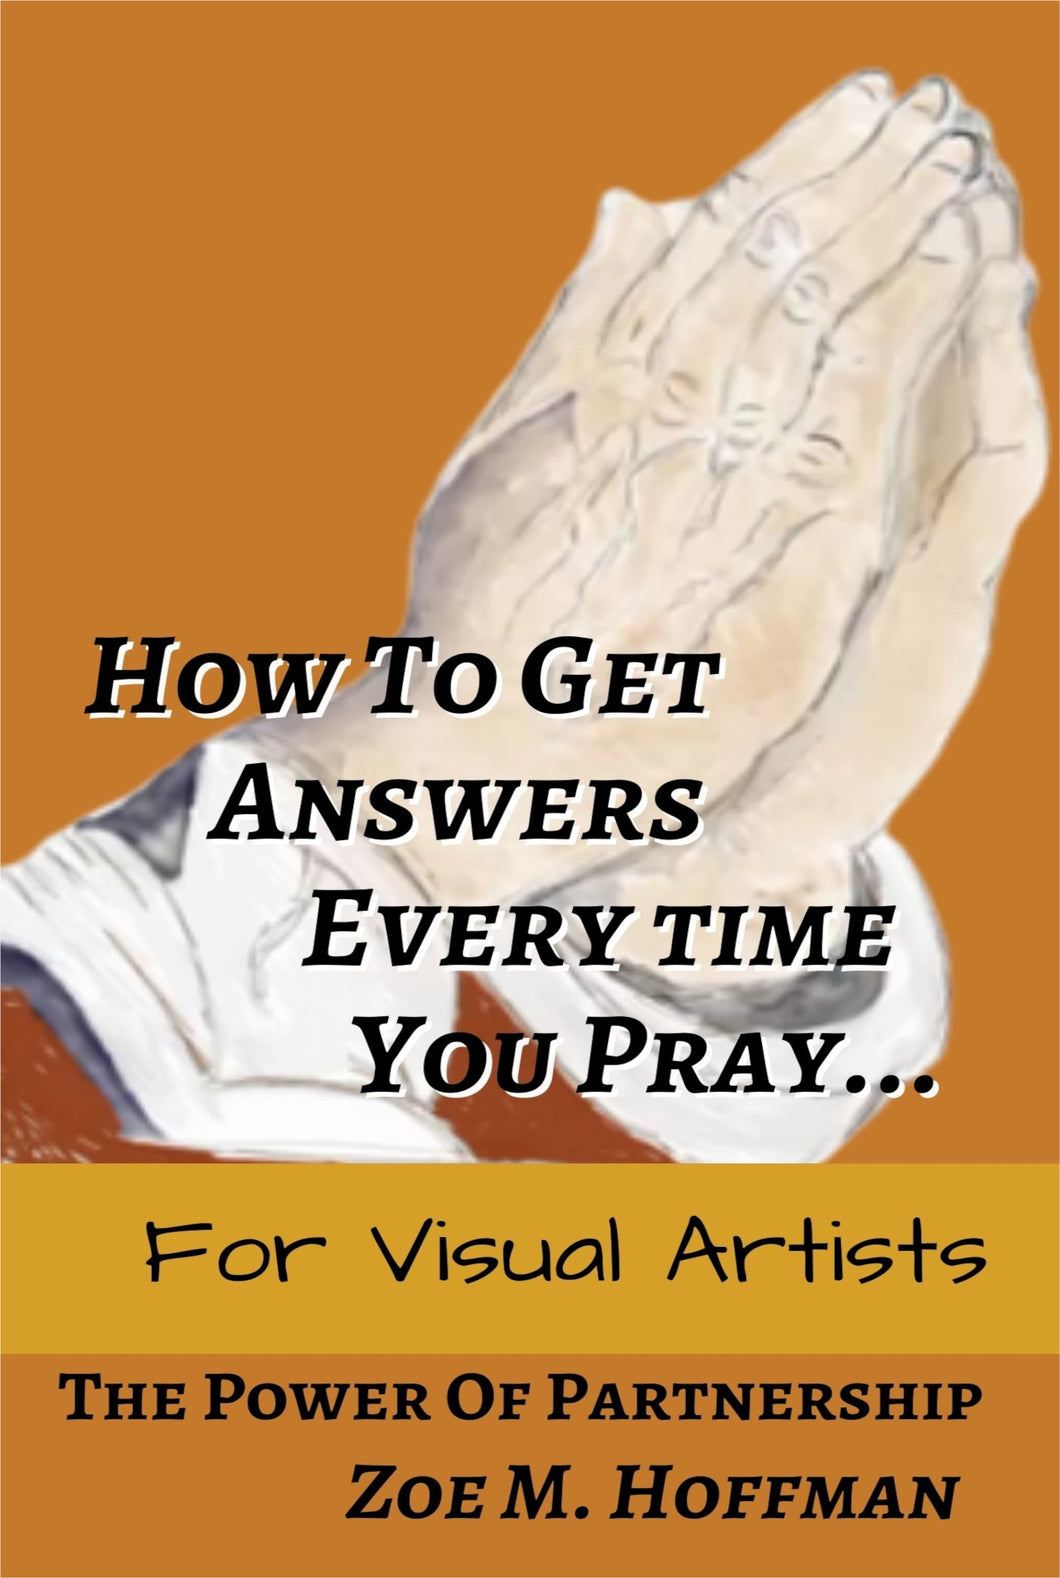 How to Get Answers Every Time You Pray... For Visual Artists